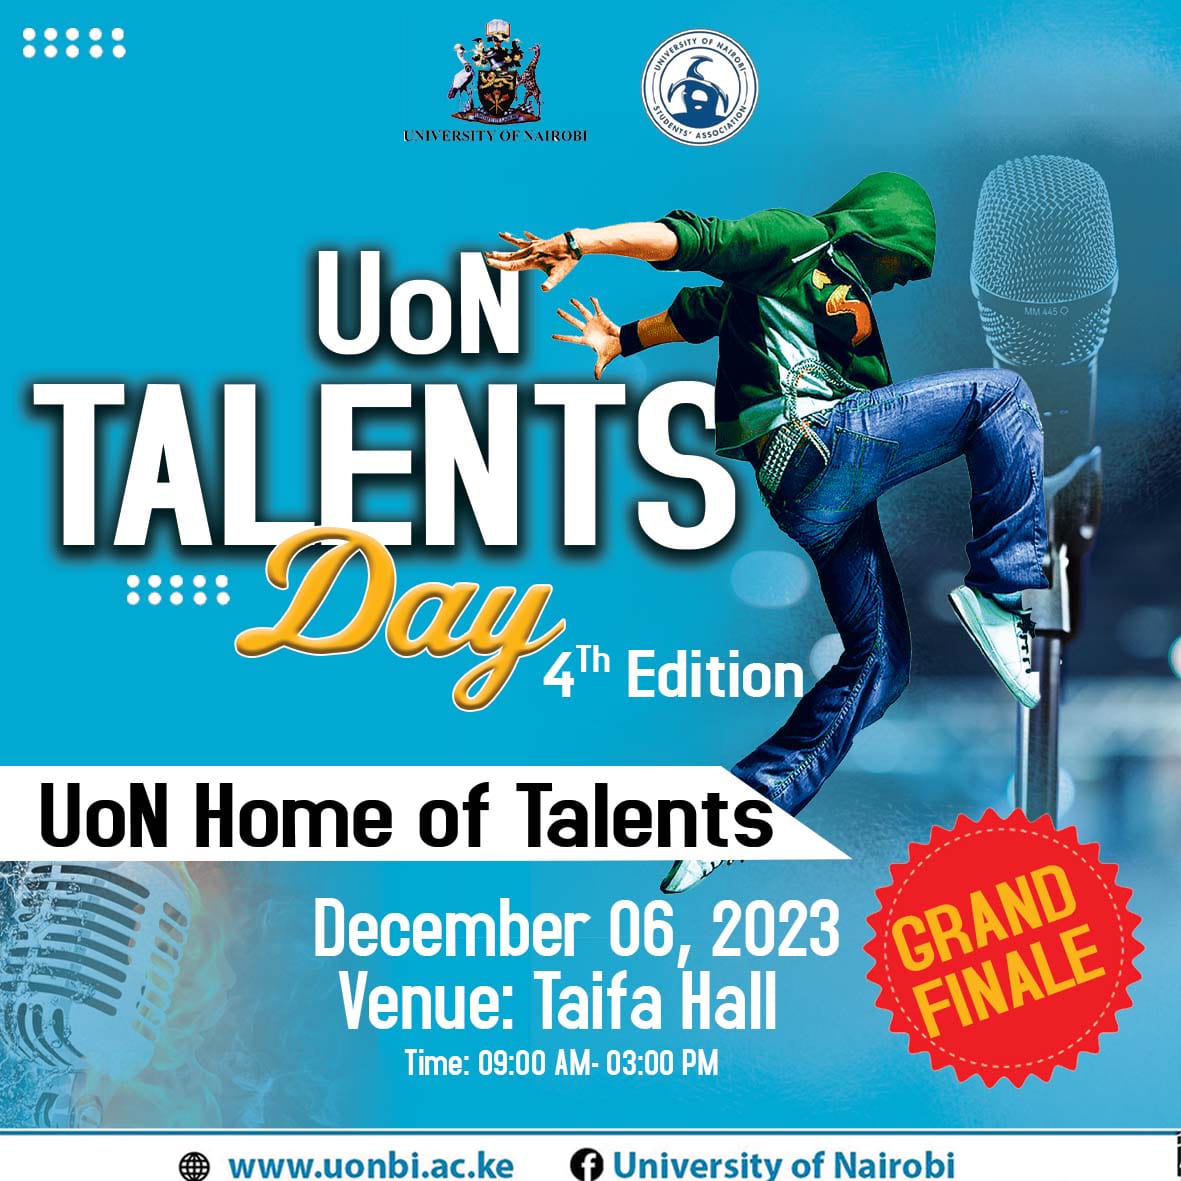 Invitation to the 4th Edition of the UoN Talents Day Grand Finale